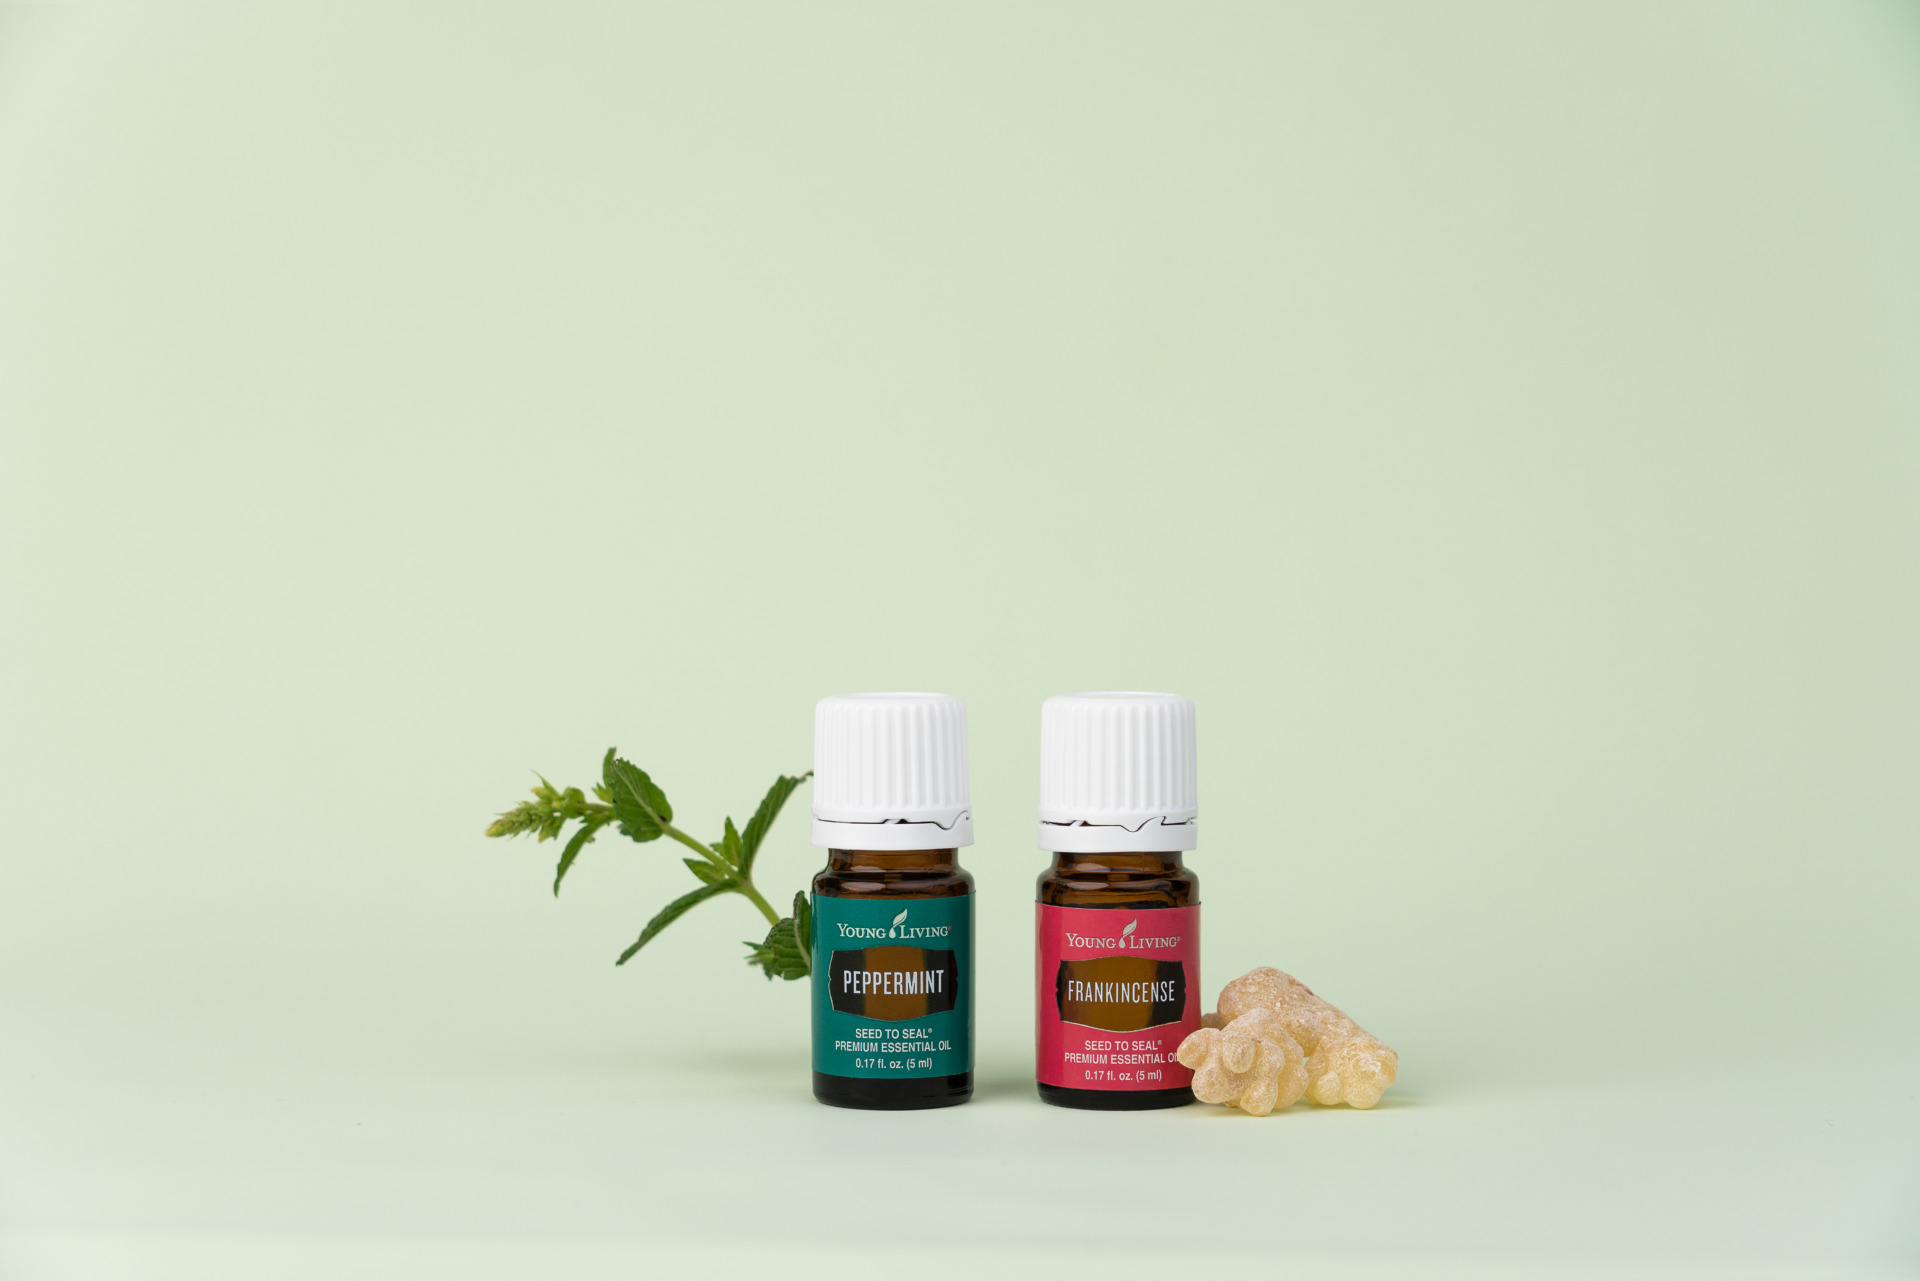 Frankincense and Peppermint Essential Oils